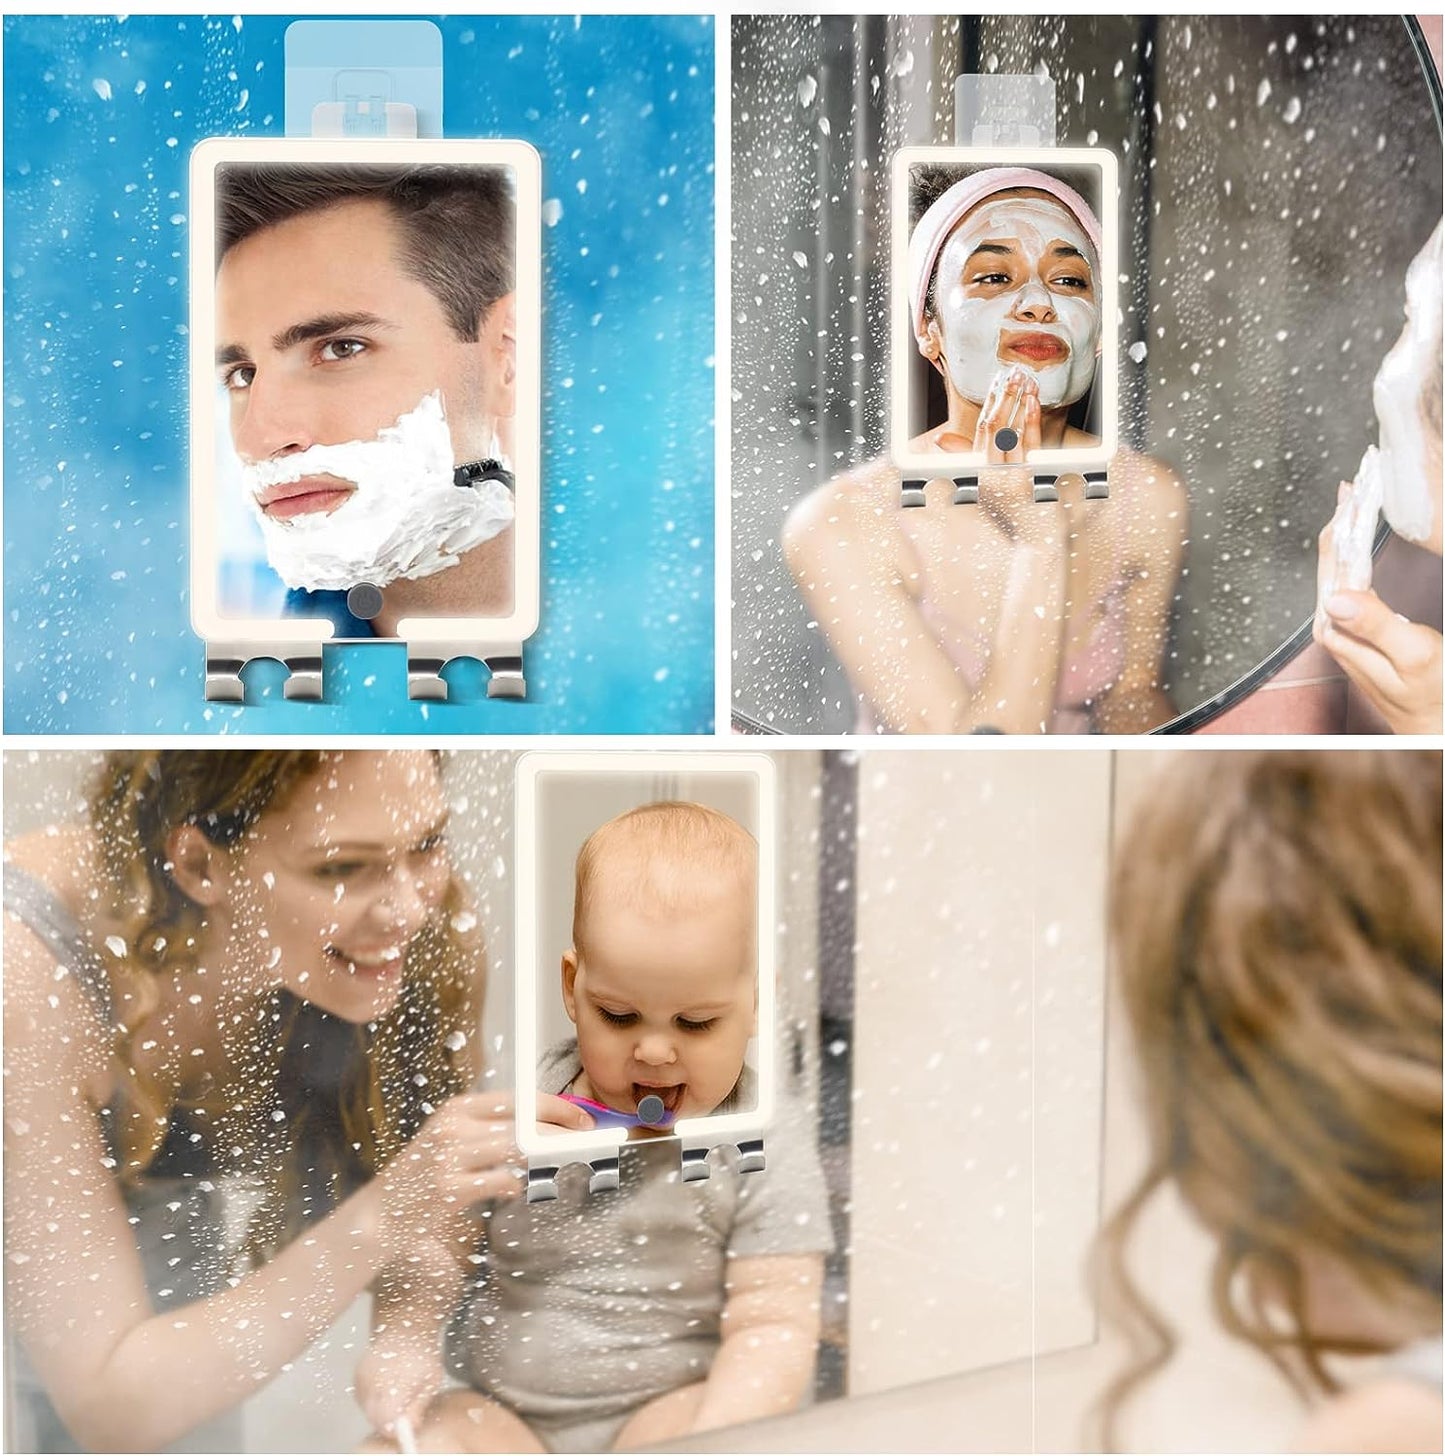 RRtide Heated Shower Mirror Fogless for Shaving with LED Light of 8X5.5inch, Rechargeable Fogless Mirror for Shower with 2 Razor Holders, Made of Real Glass, No Distortion